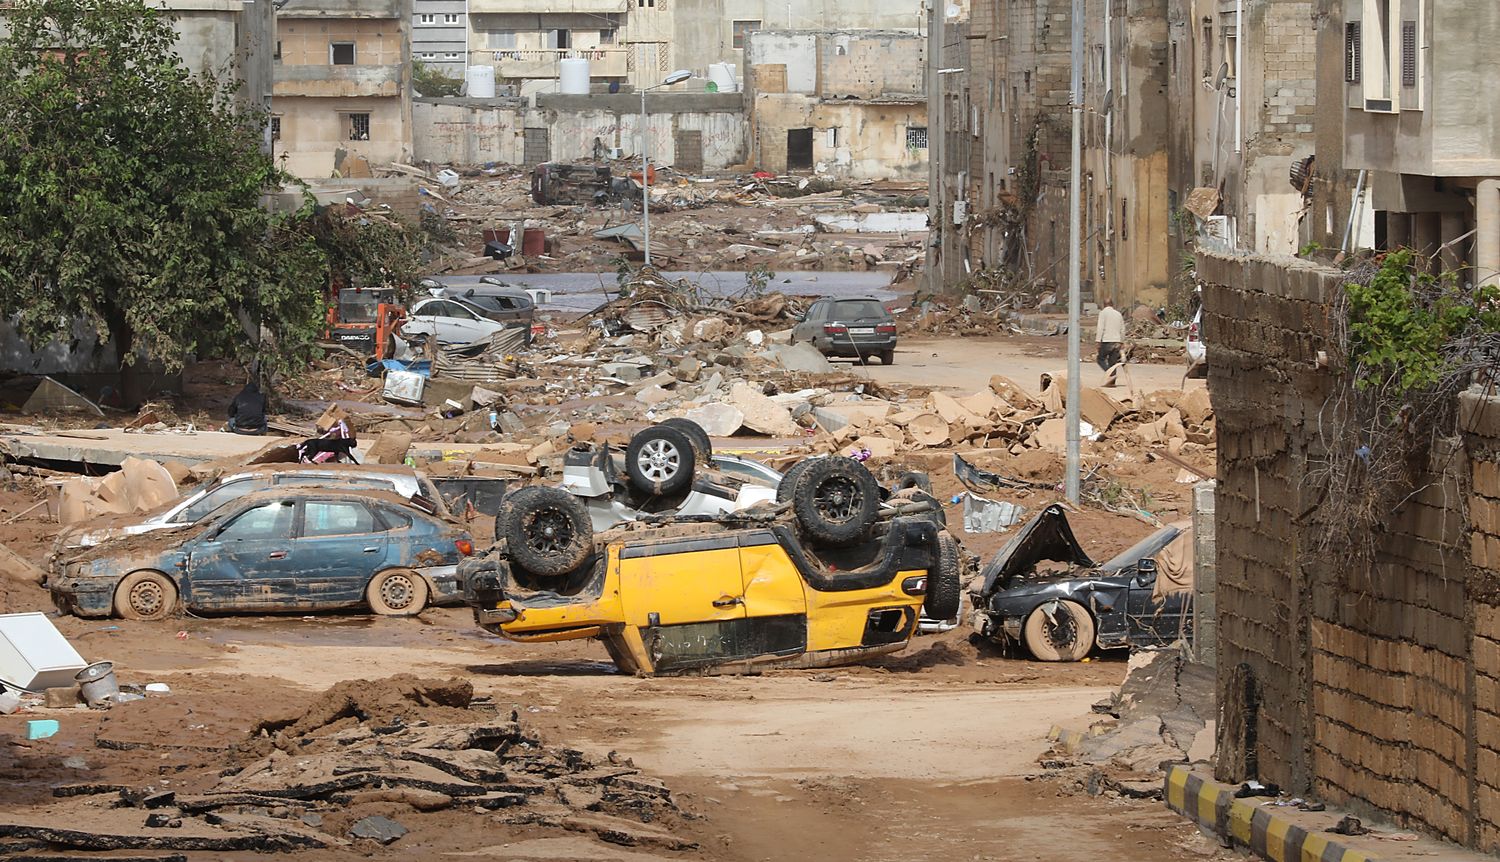 Upturned cars in the port city of Derna, Libya, caused by flash floods